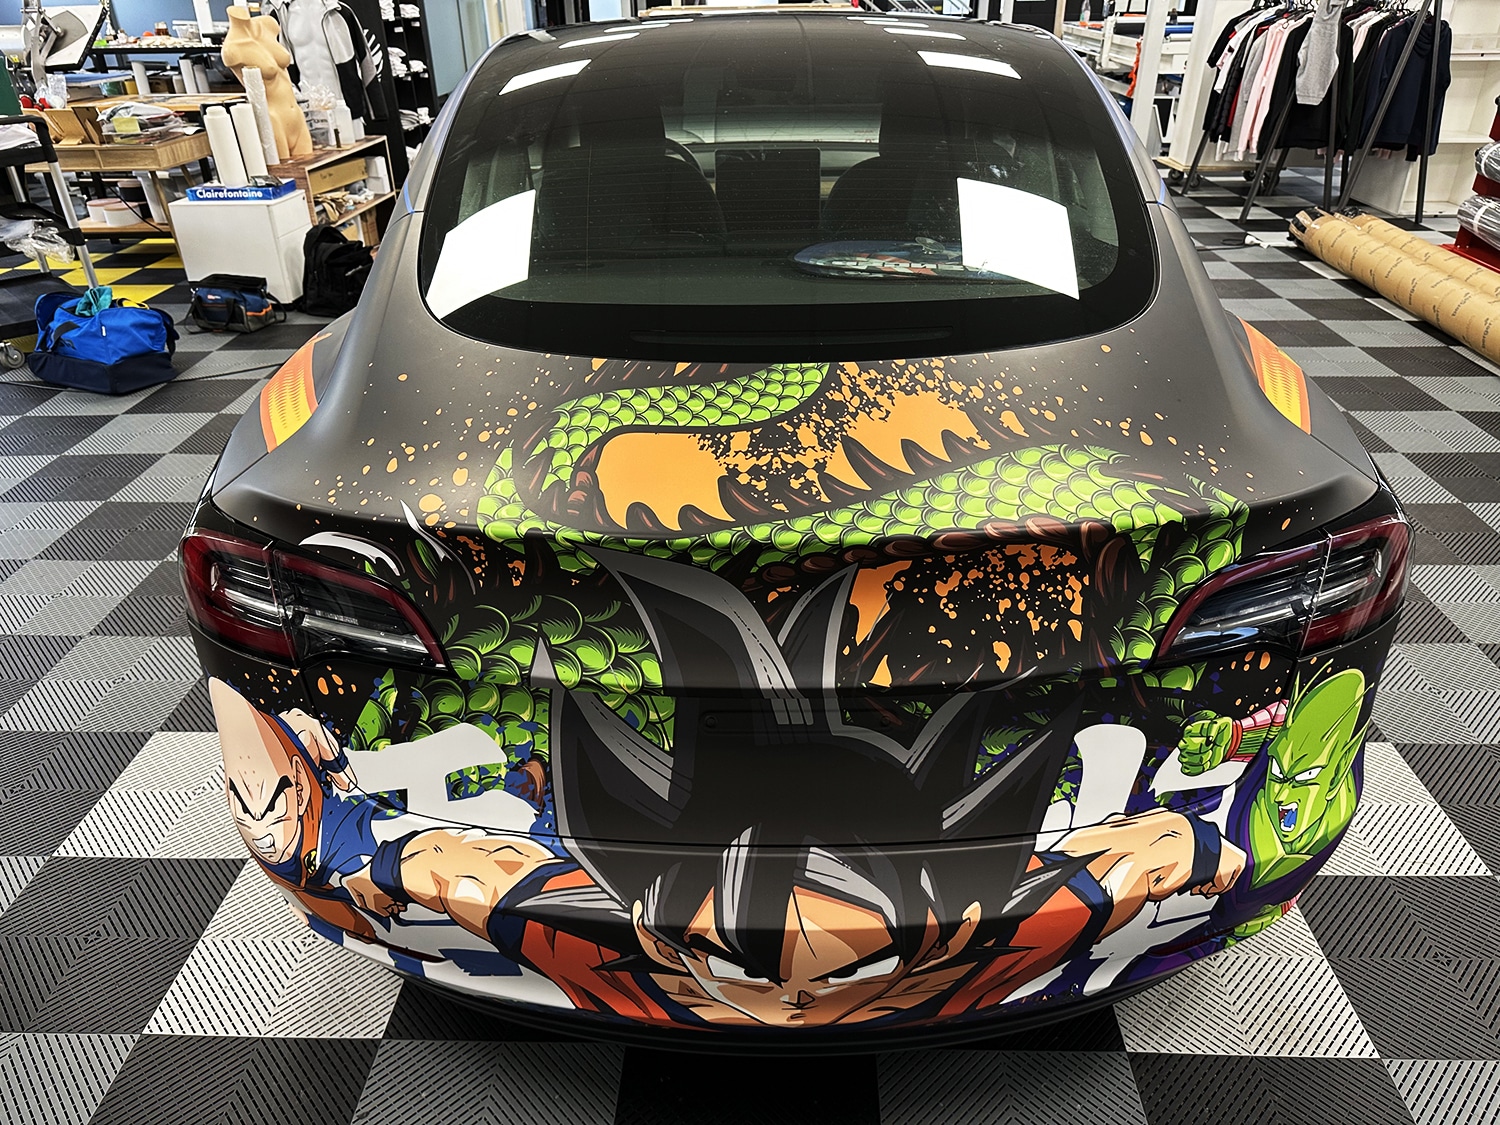 Tesla Dragon Ball Z covering (wrapping)